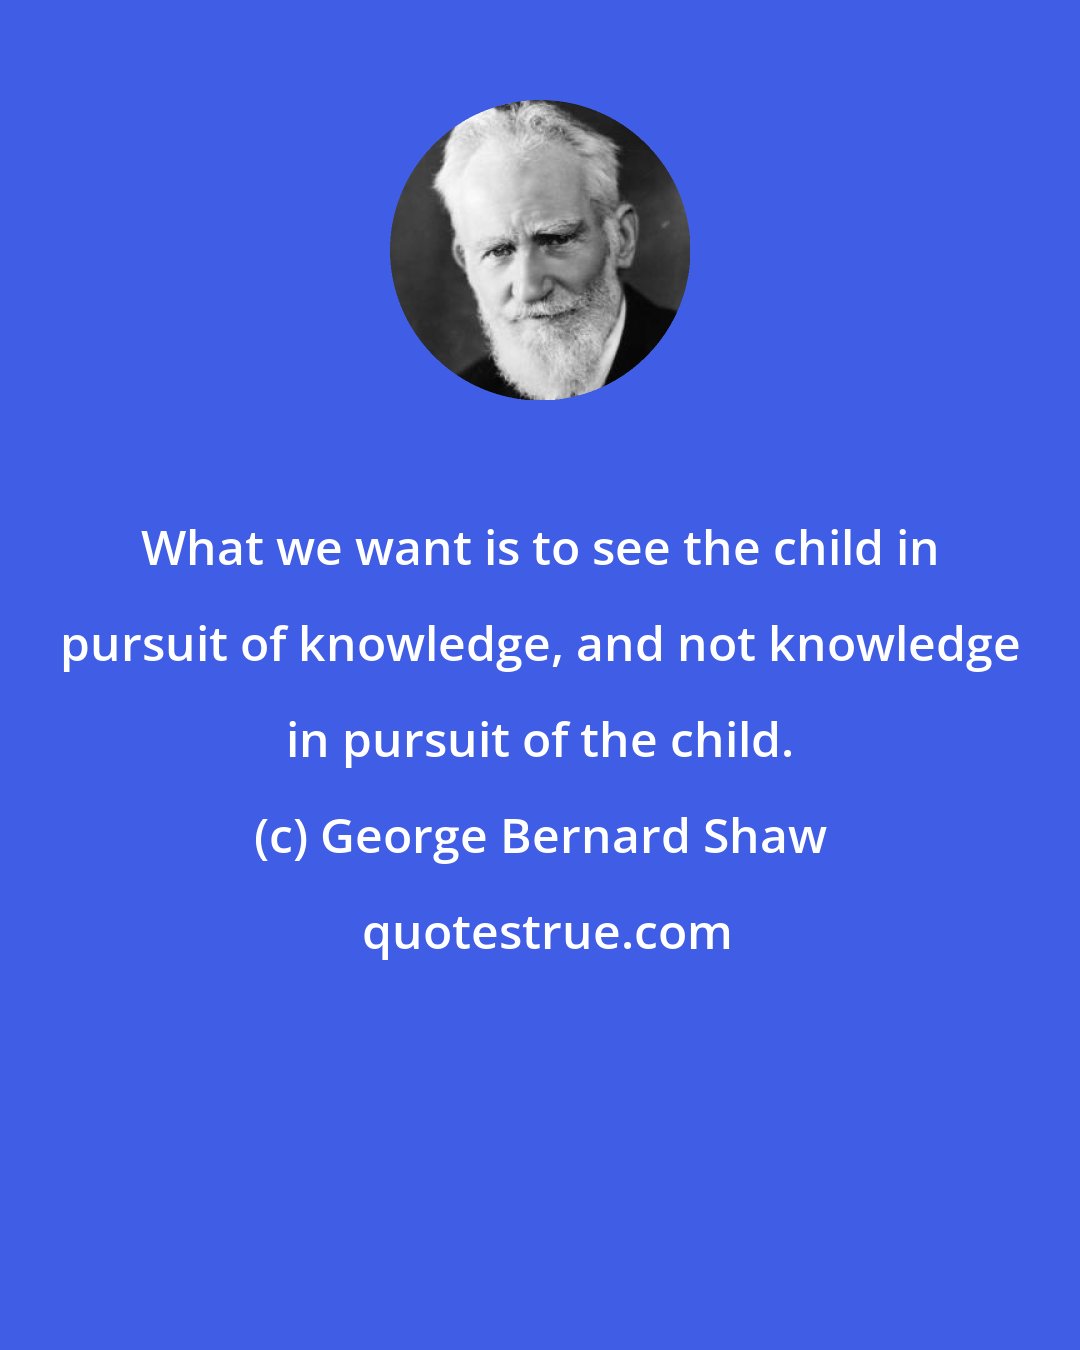 George Bernard Shaw: What we want is to see the child in pursuit of knowledge, and not knowledge in pursuit of the child.